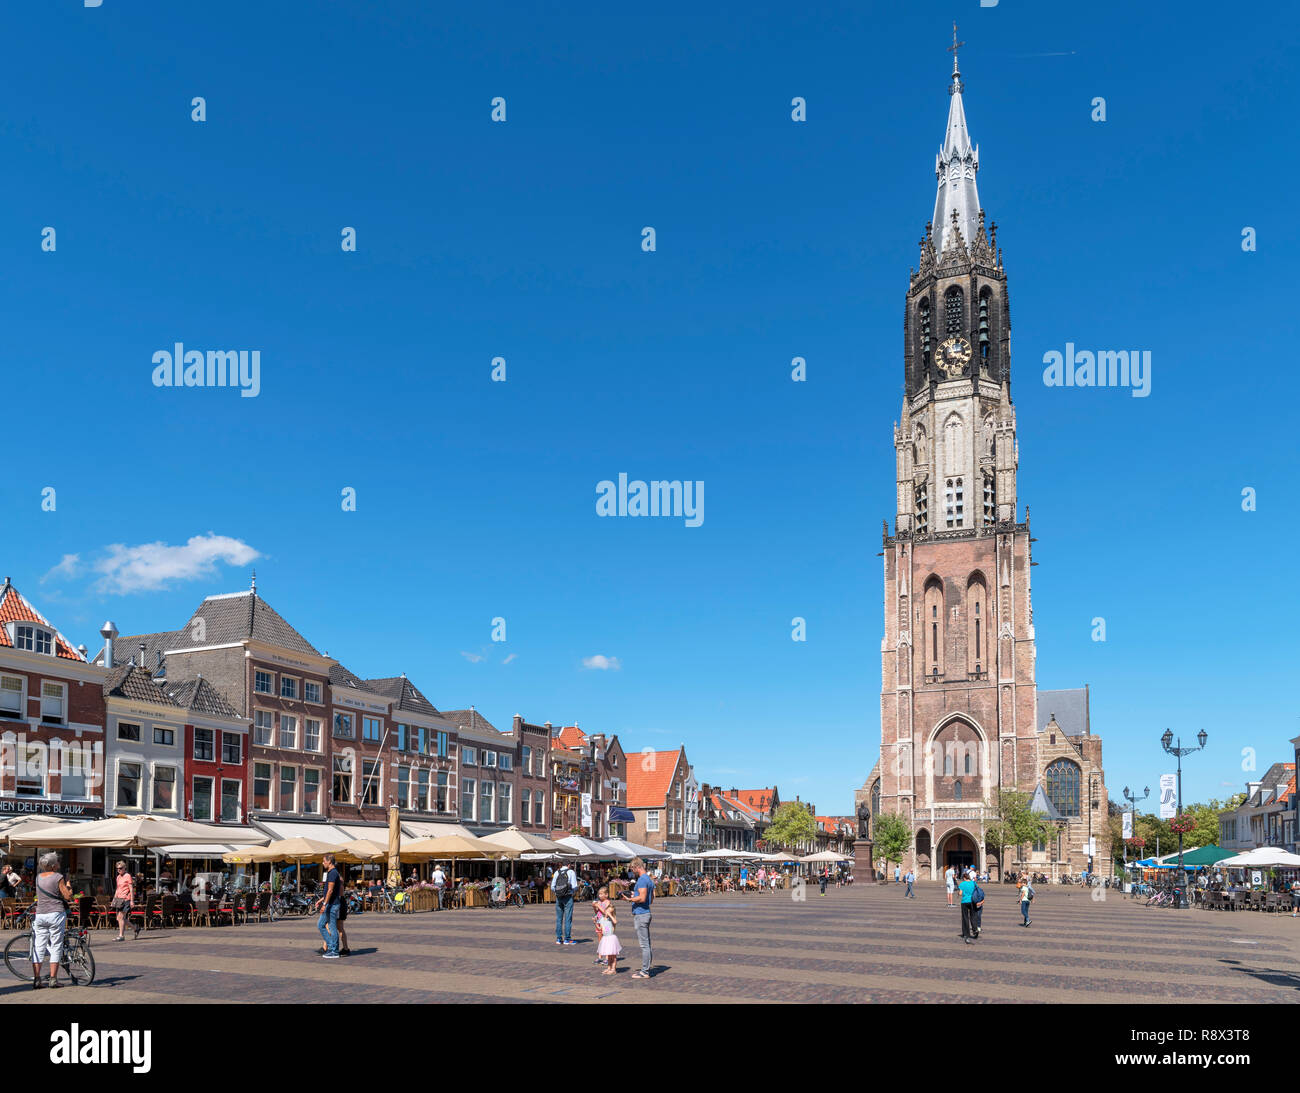 The historic 15th century Nieuwe Kerk (New Church) in the Markt (Market Square), Delft, Zuid-Holland (South Holland), Netherlands Stock Photo